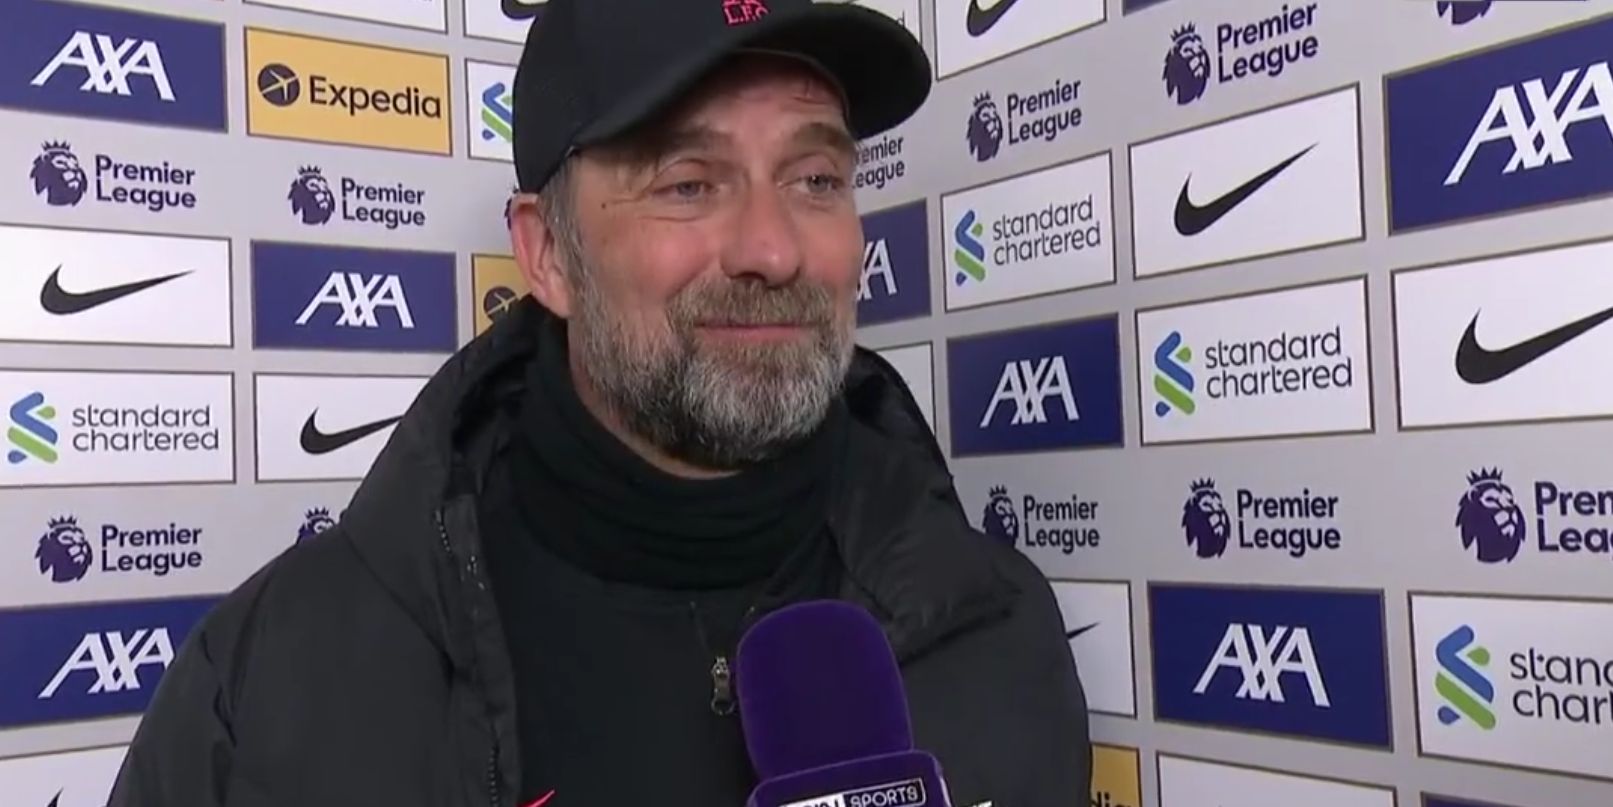 (Video) “The atmosphere was outstanding” – Jurgen Klopp comments on Liverpool’s supporters and the Anfield atmosphere